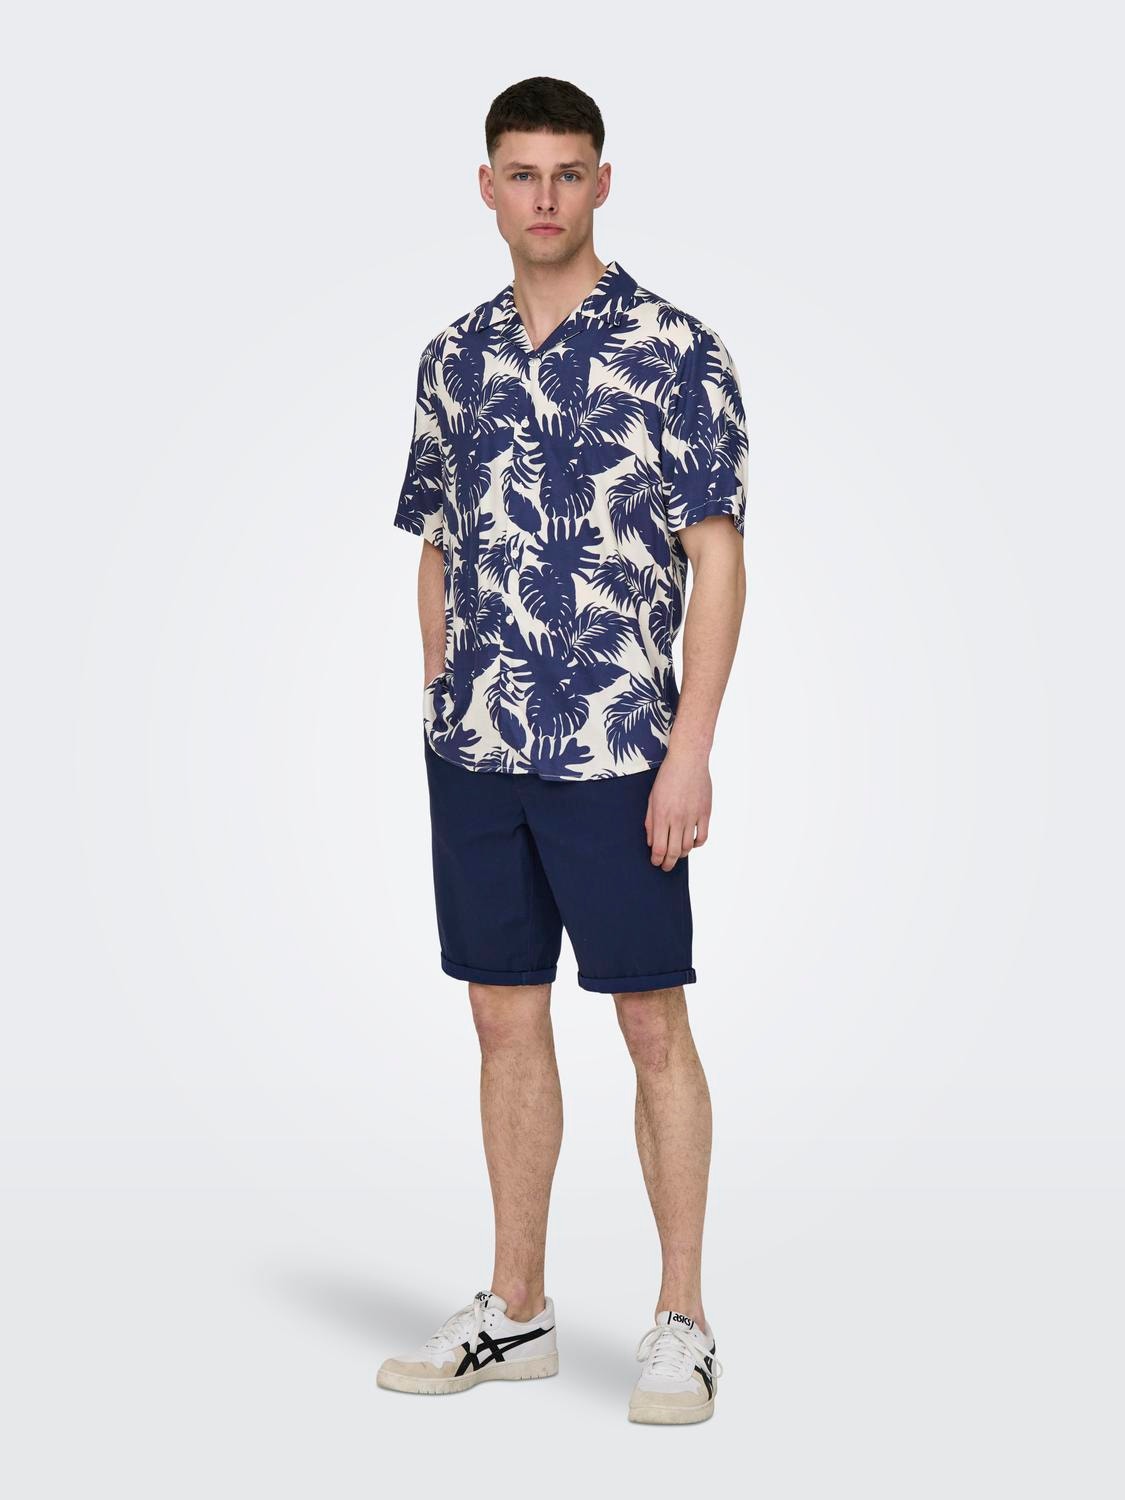 ONLY & SONS Short sleeved shirt with pattern -Dress Blues - 22028400